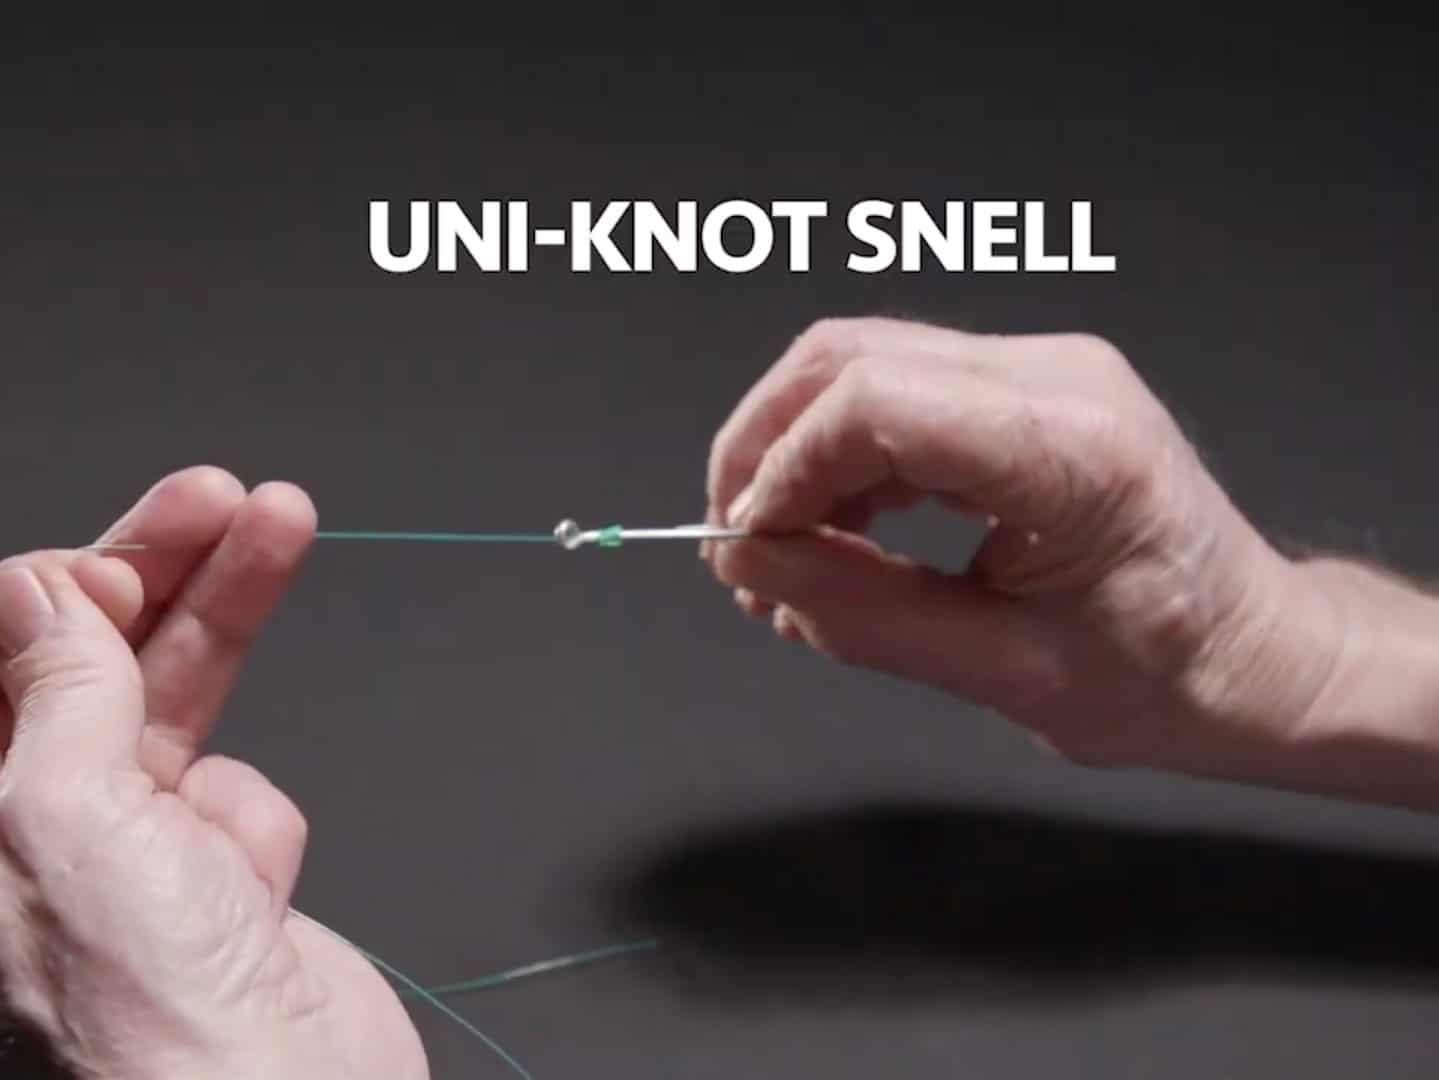 How to Snell a Hook Using a Uni-Knot